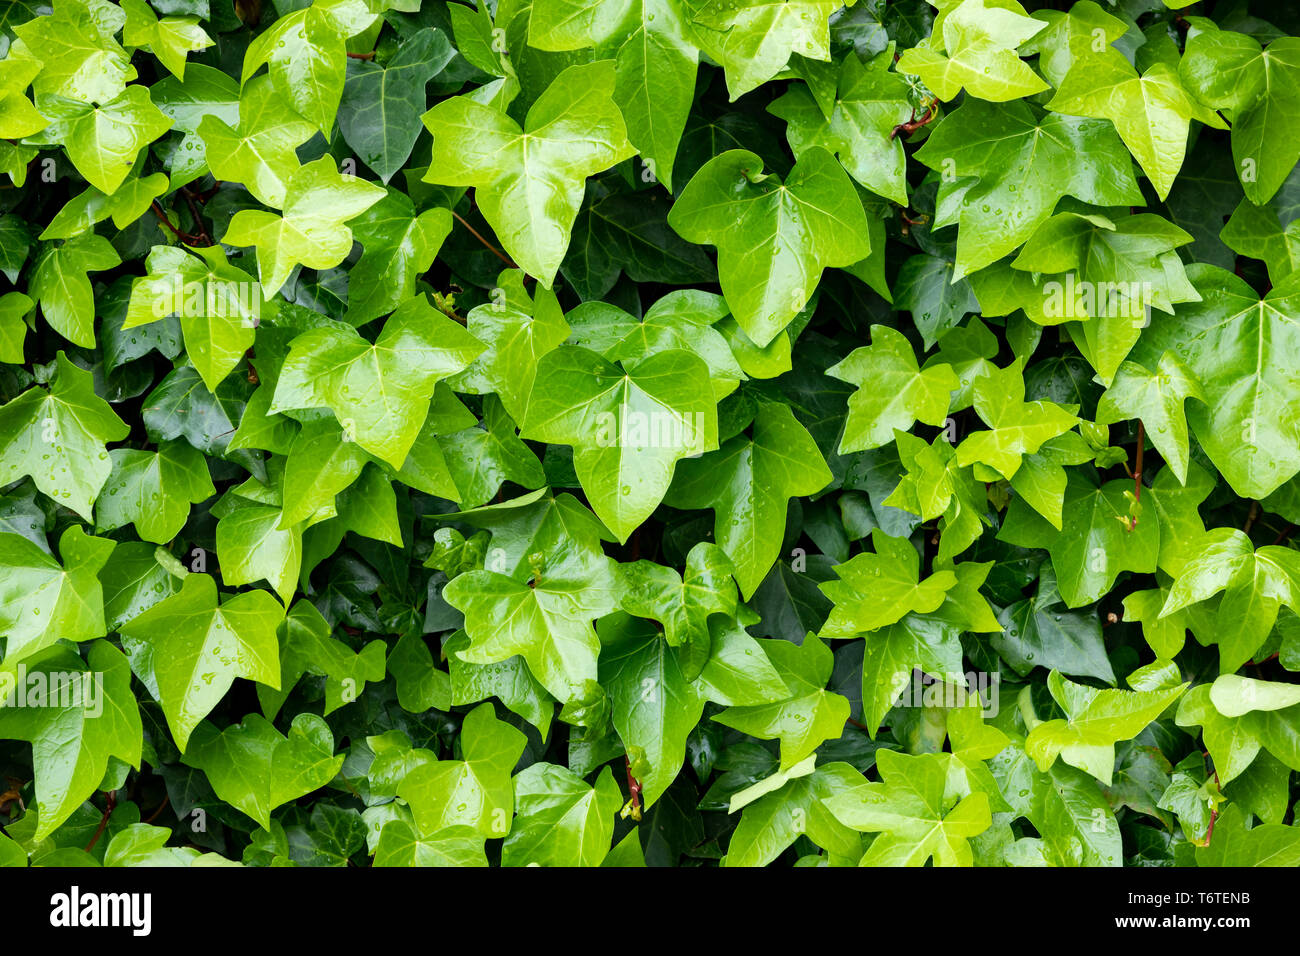 Download wallpaper 938x1668 ivy leaves drops plant green iphone  876s6 for parallax hd background